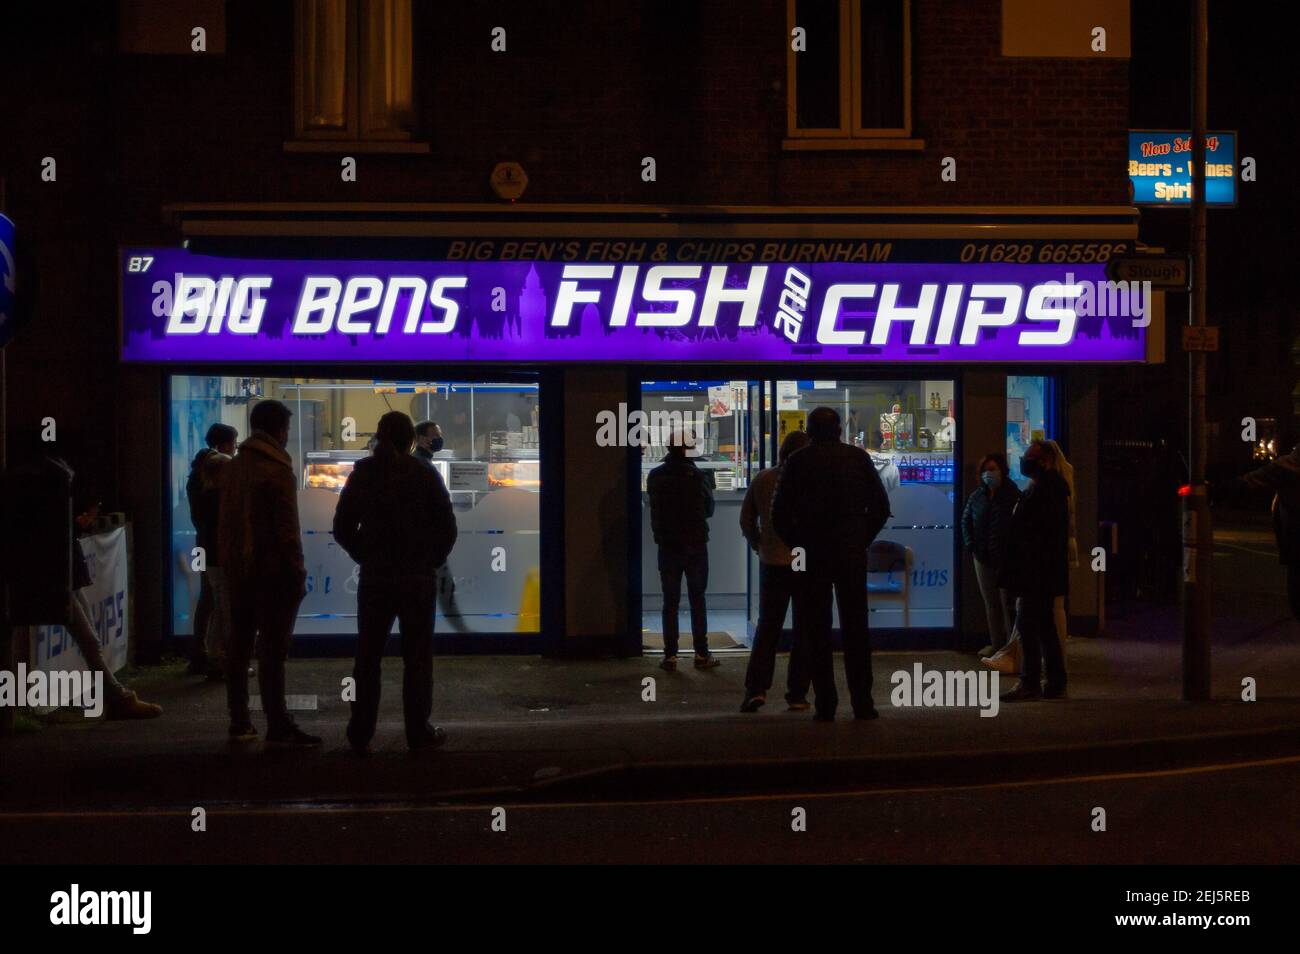 Burnham, Slough, Berkshire, UK. 20th February, 2021. People make a socially distanced queue outside Big Ben's Fish and Chips shop in Slough. Take aways have been very popular during the Covid-19 Coronavirus lockdown. Credit: Maureen McLean/Alamy Stock Photo